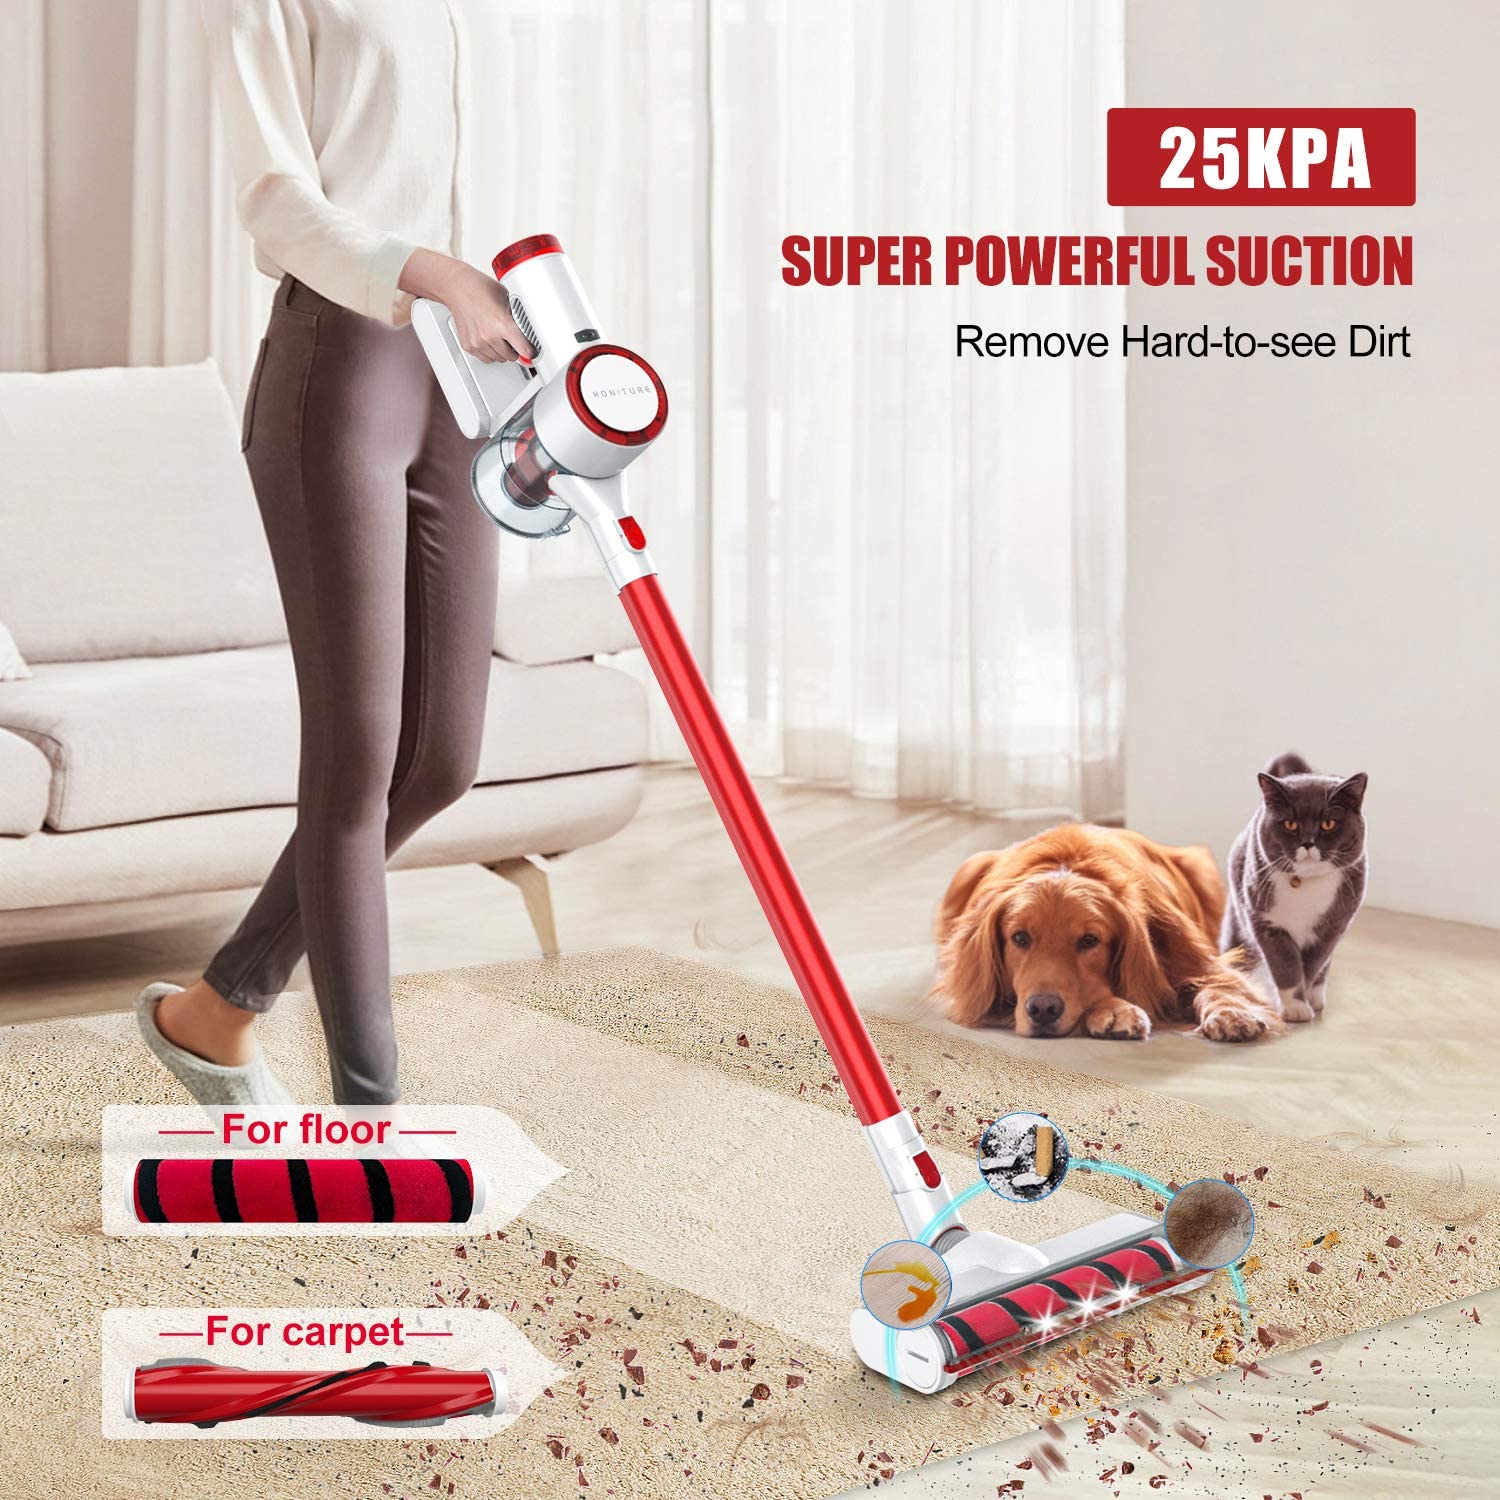 Honiture gifted me this 450W  33000PA s14 cordless vacuum to try